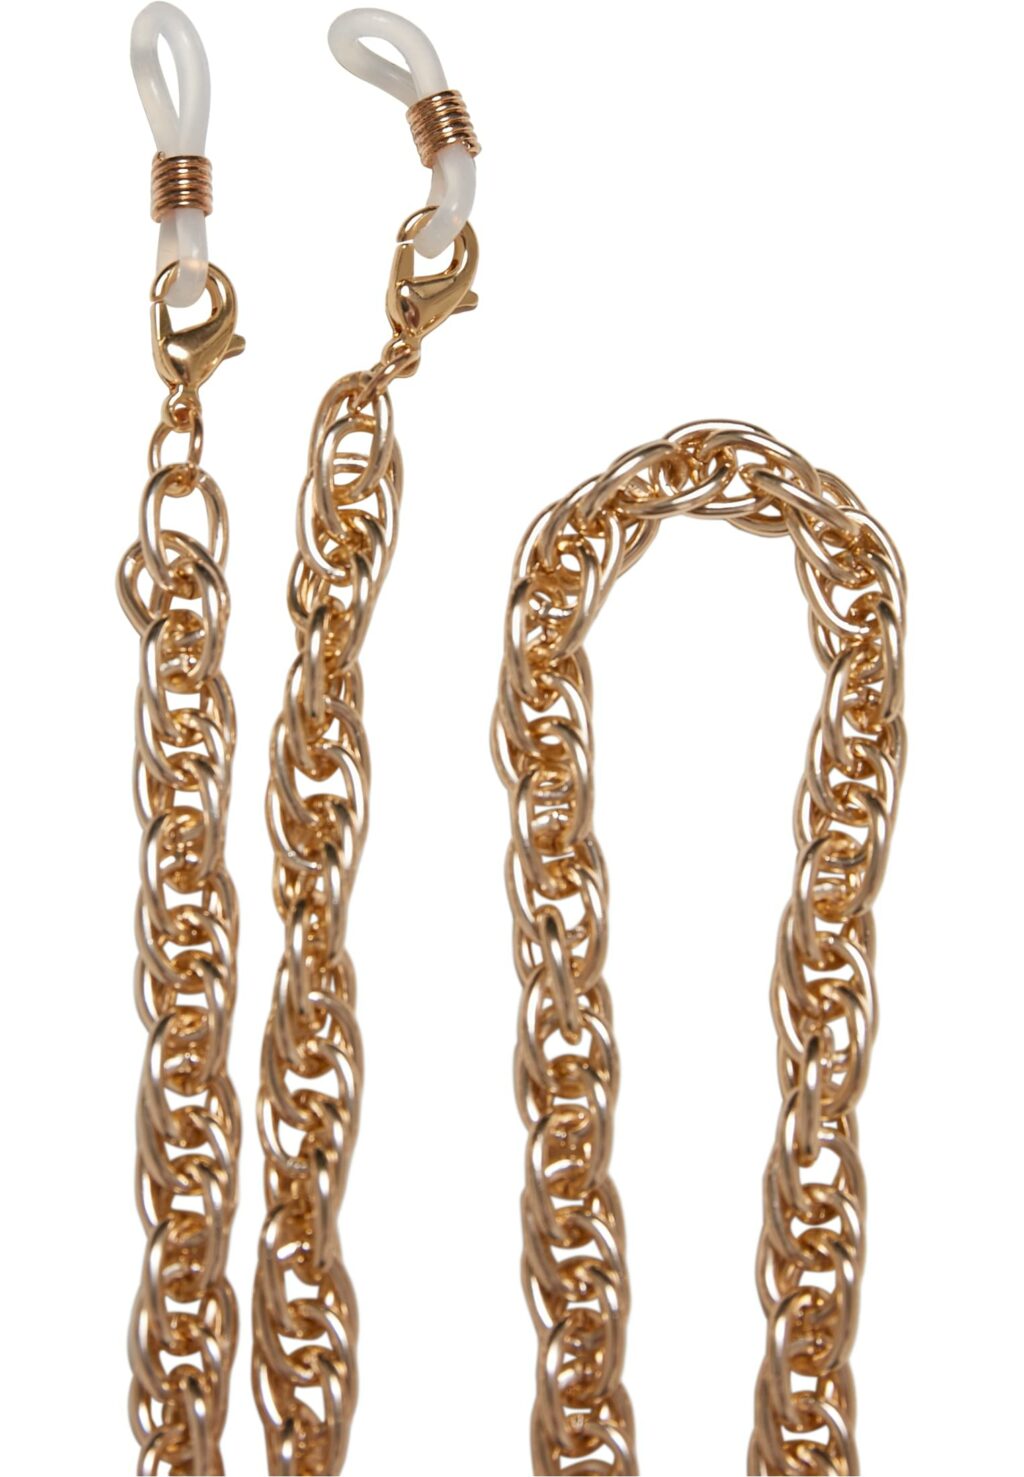 Multifuntional Metalchain 2-Pack gold one TB5177